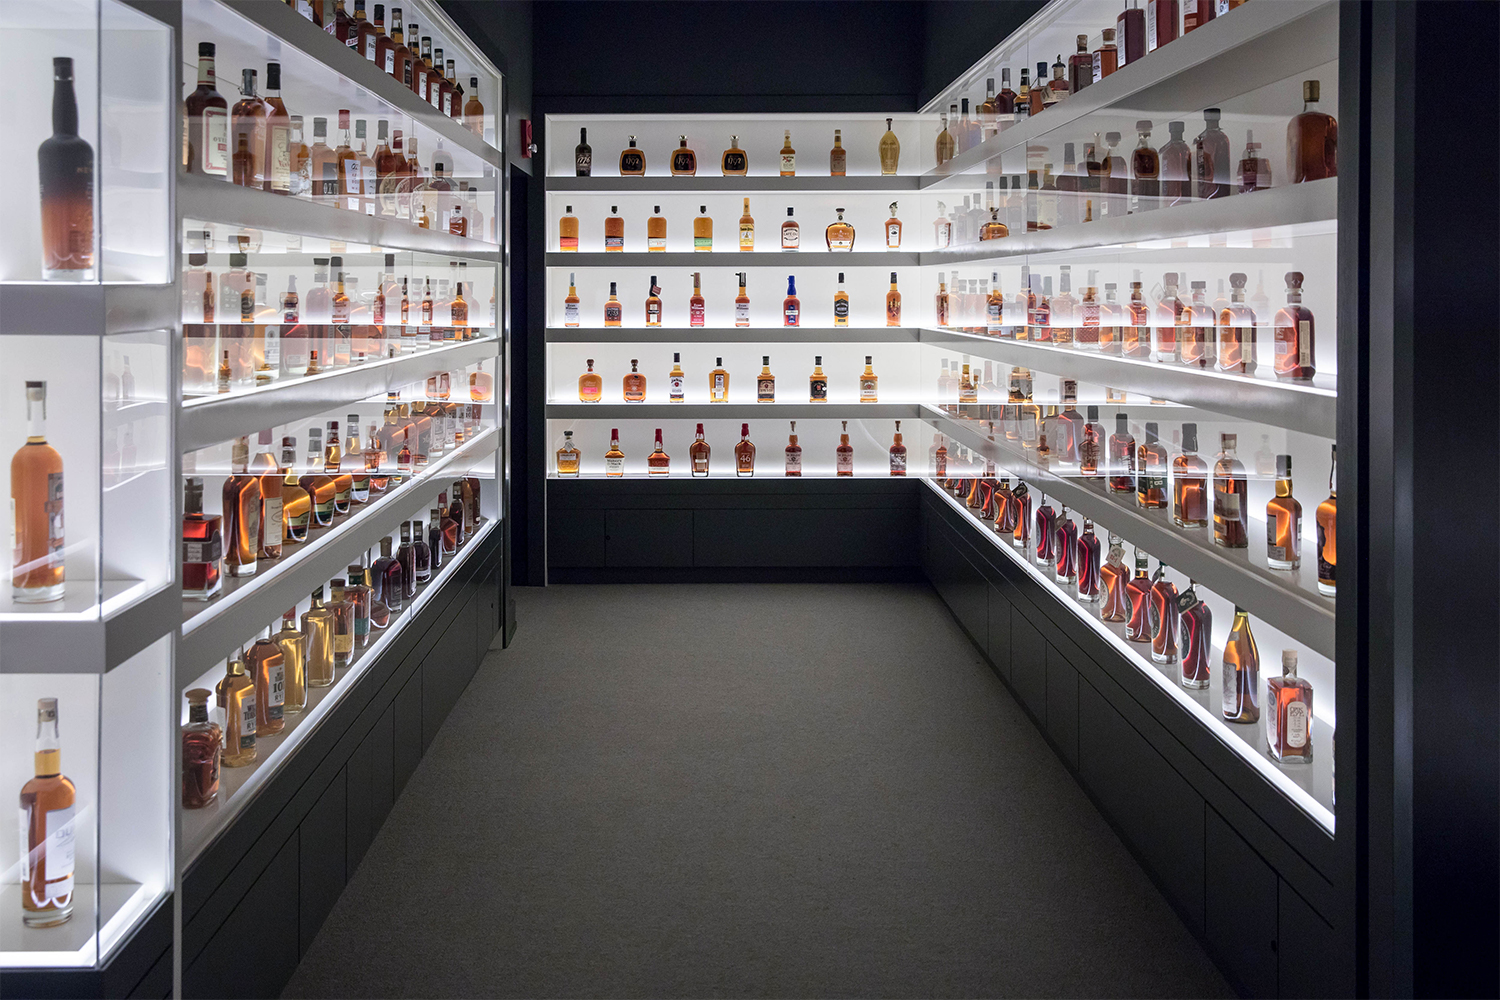 The bourbon bottle hall at Frazier History Museum in Louisville, Kentucky